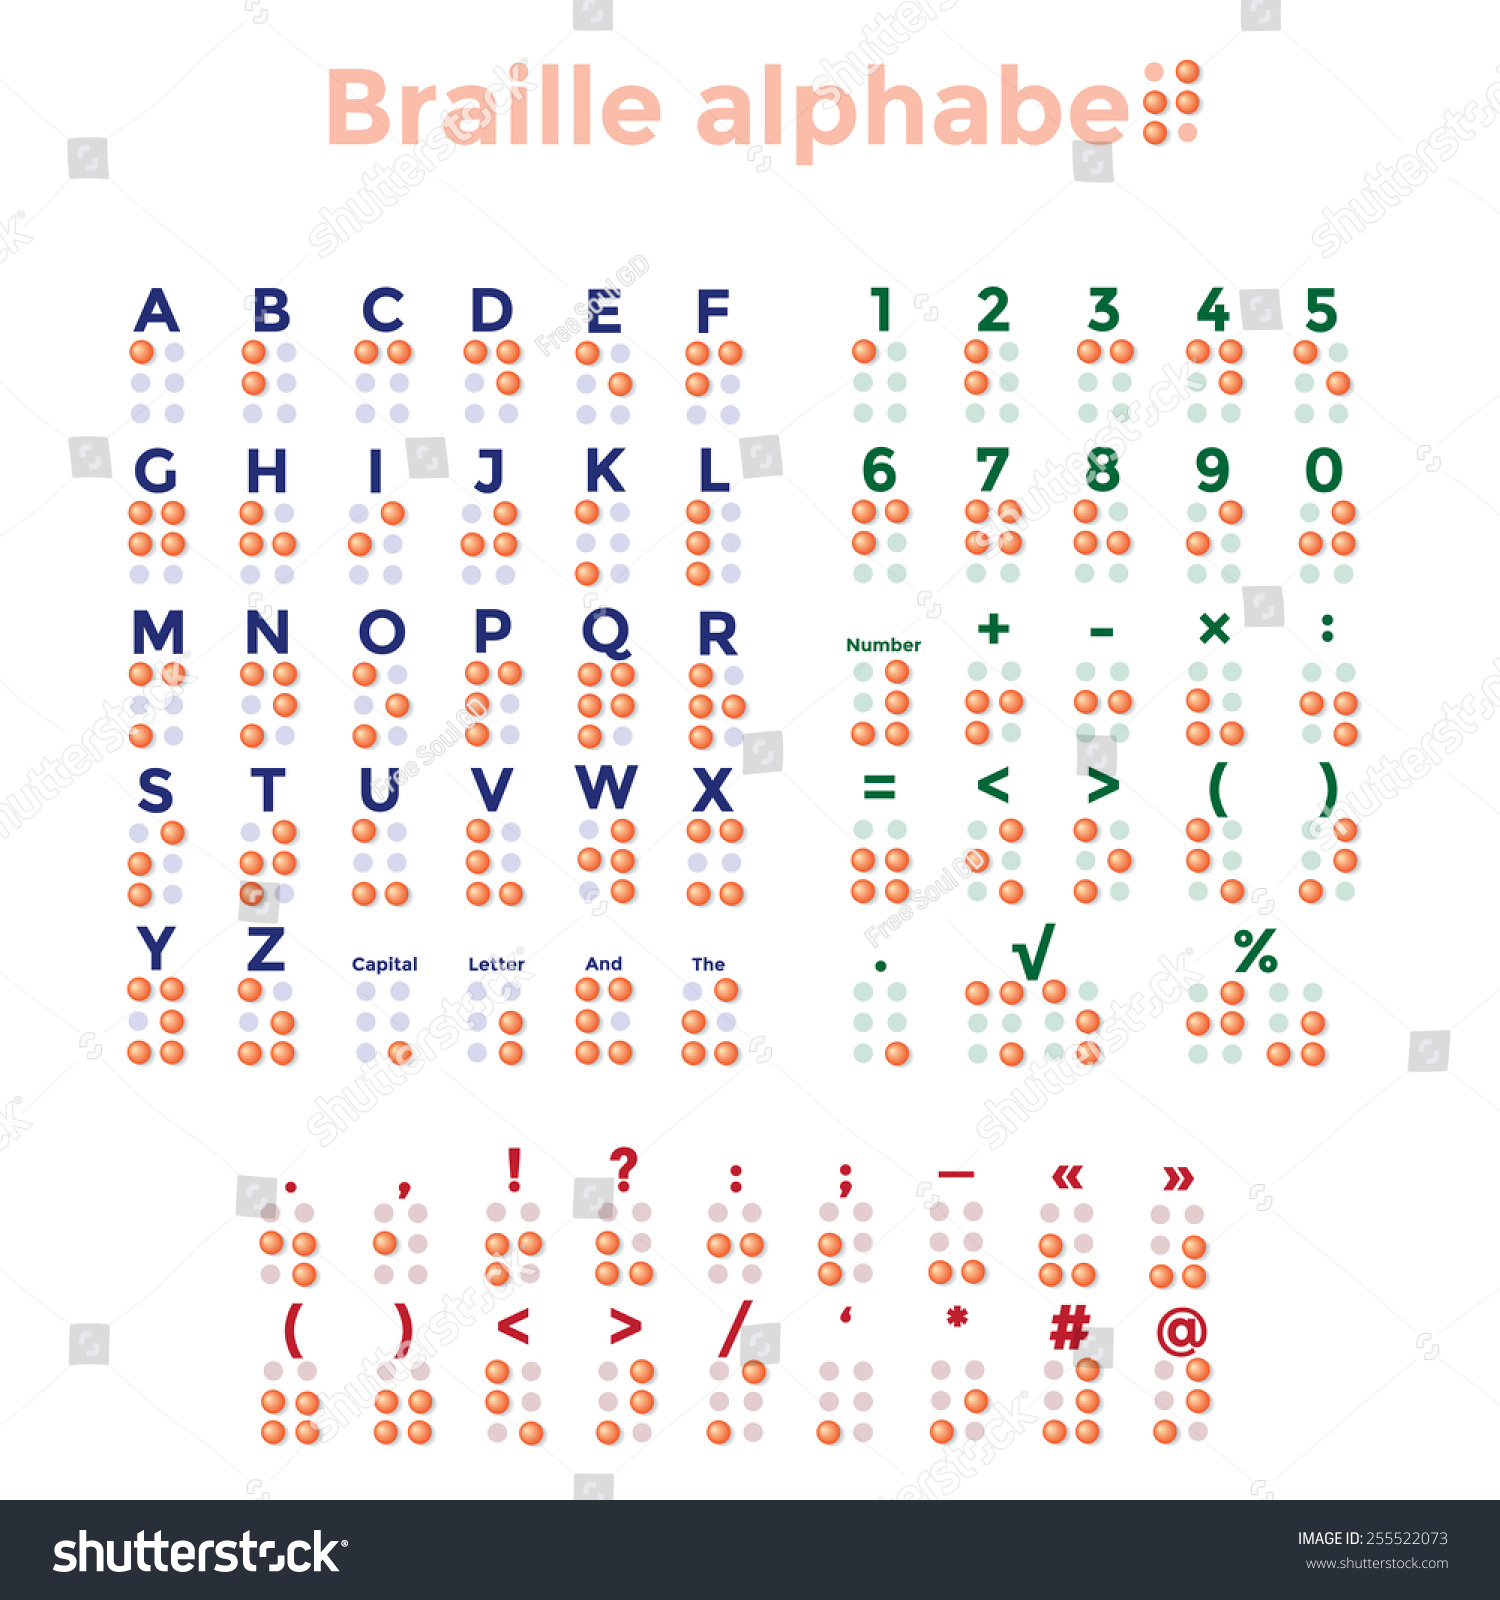 Braille Alphabet Punctuation Numbers Vector Illustration Stock Vector